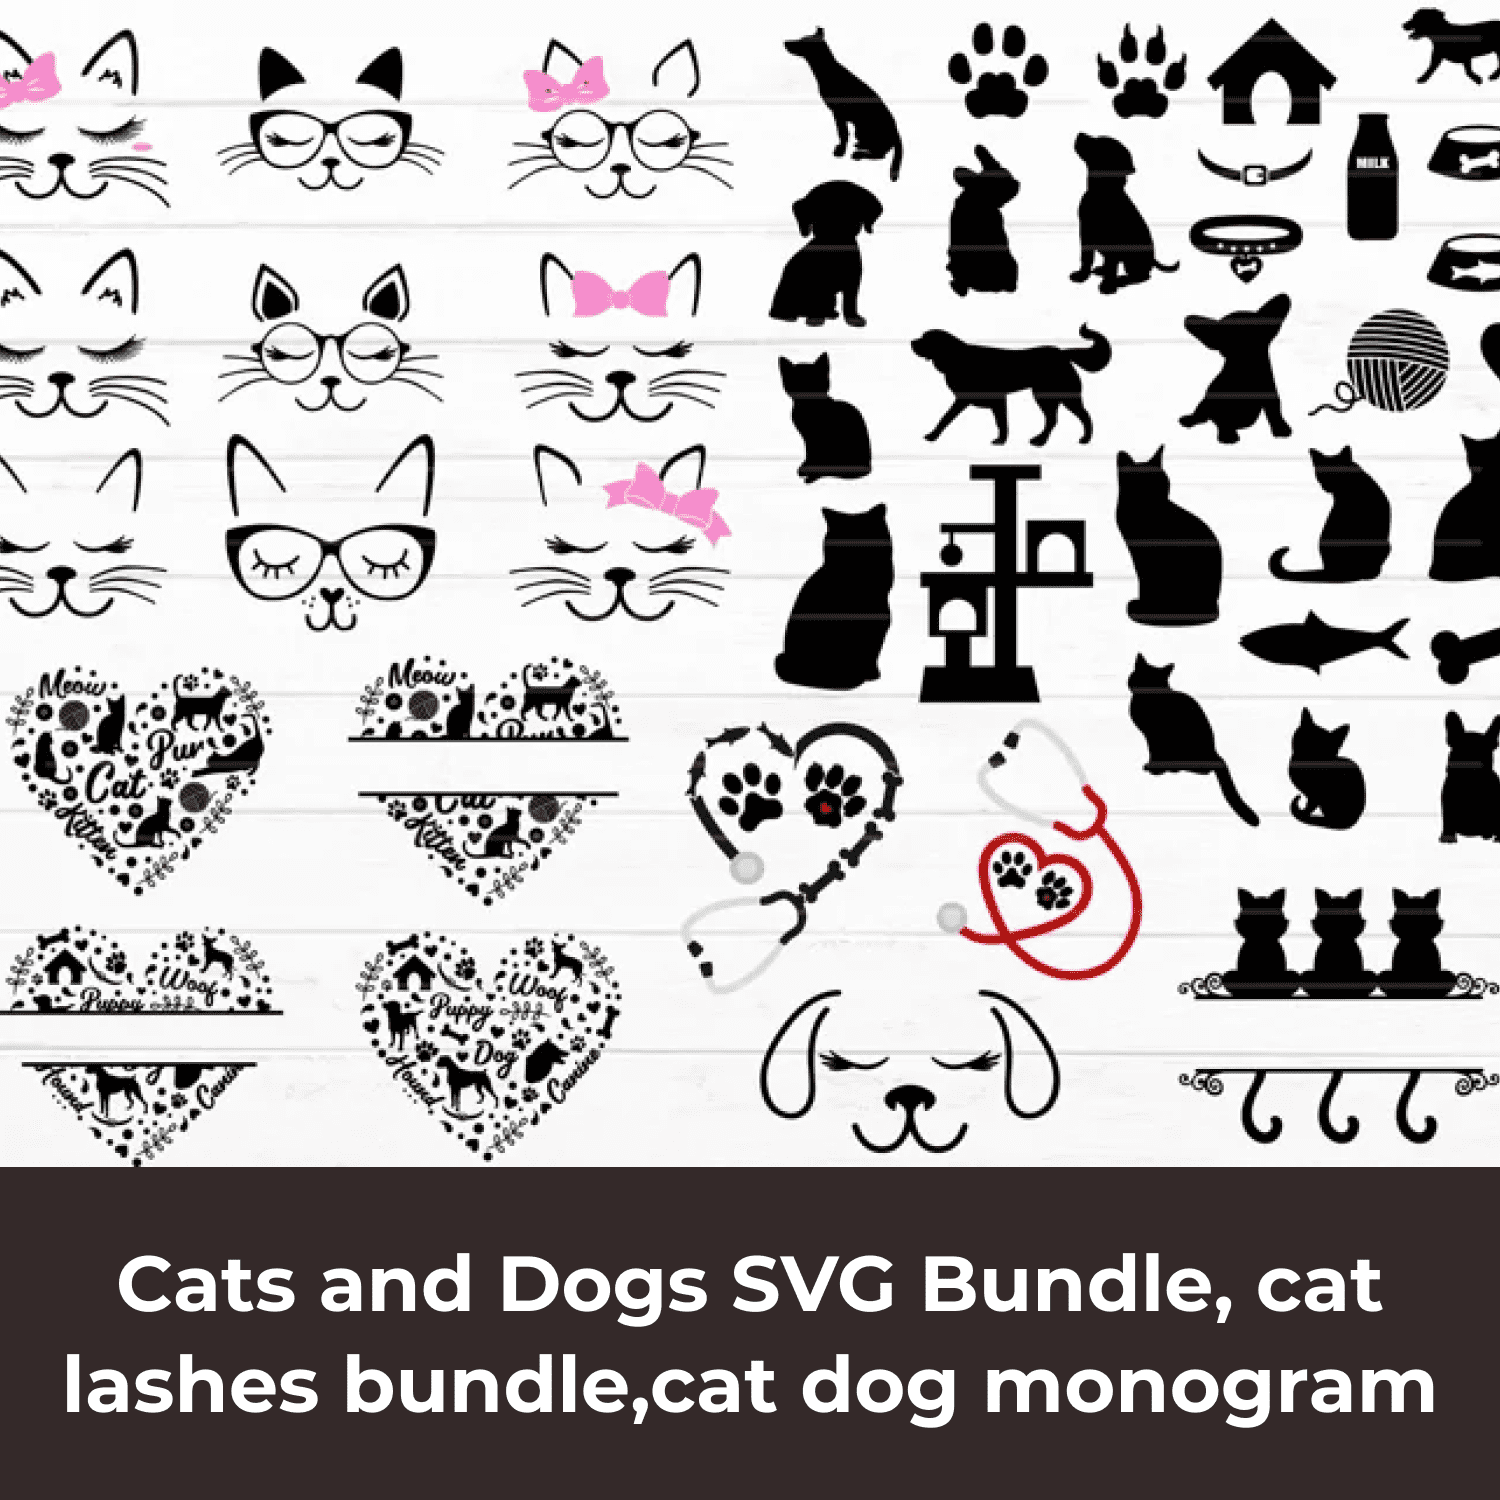 Cats and dogs svg bundle.